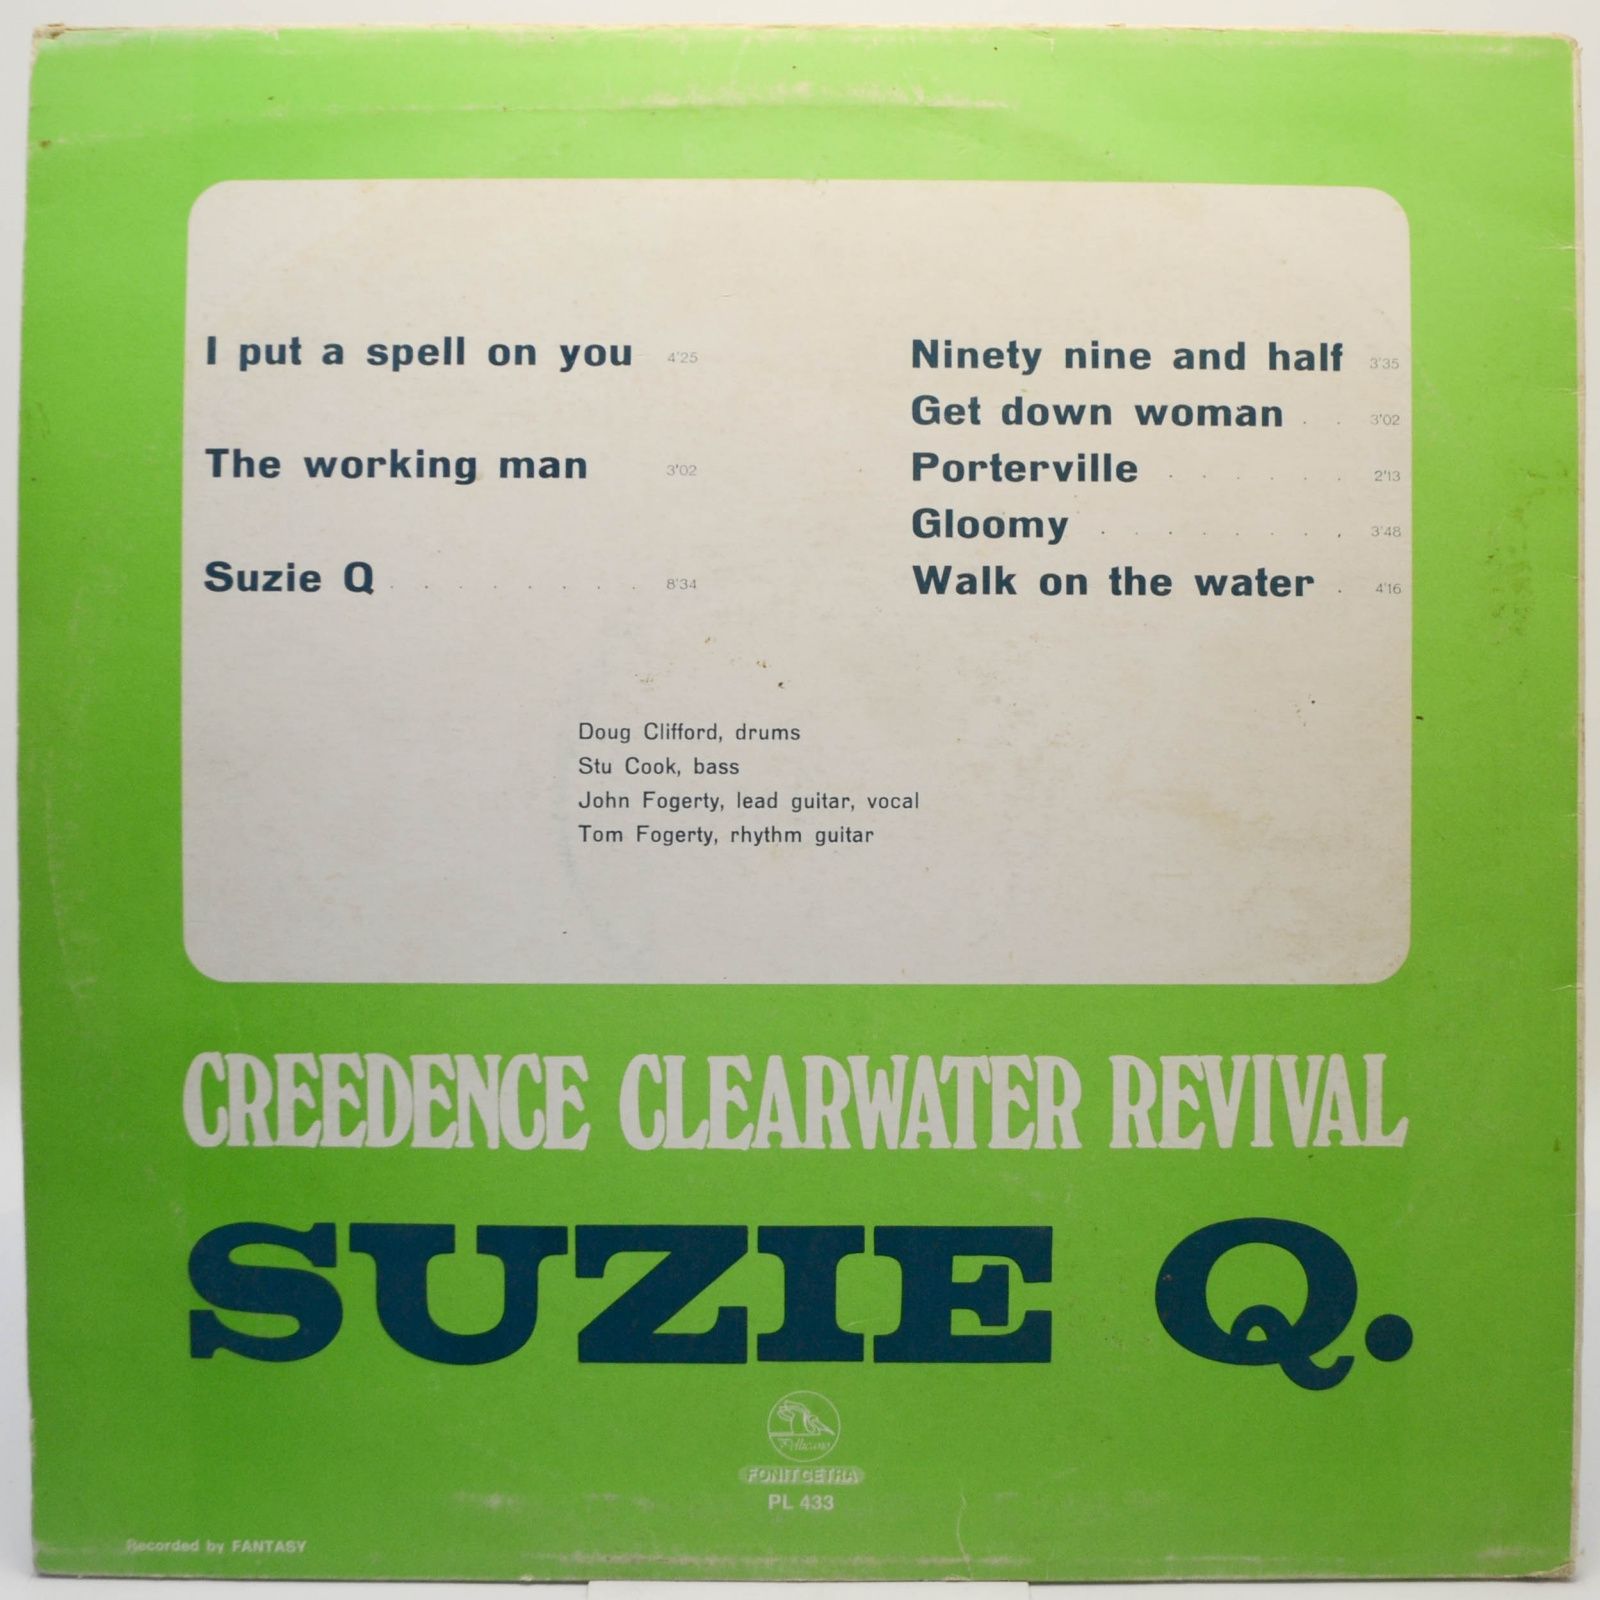 Creedence Clearwater Revival — Suzie Q., 1968